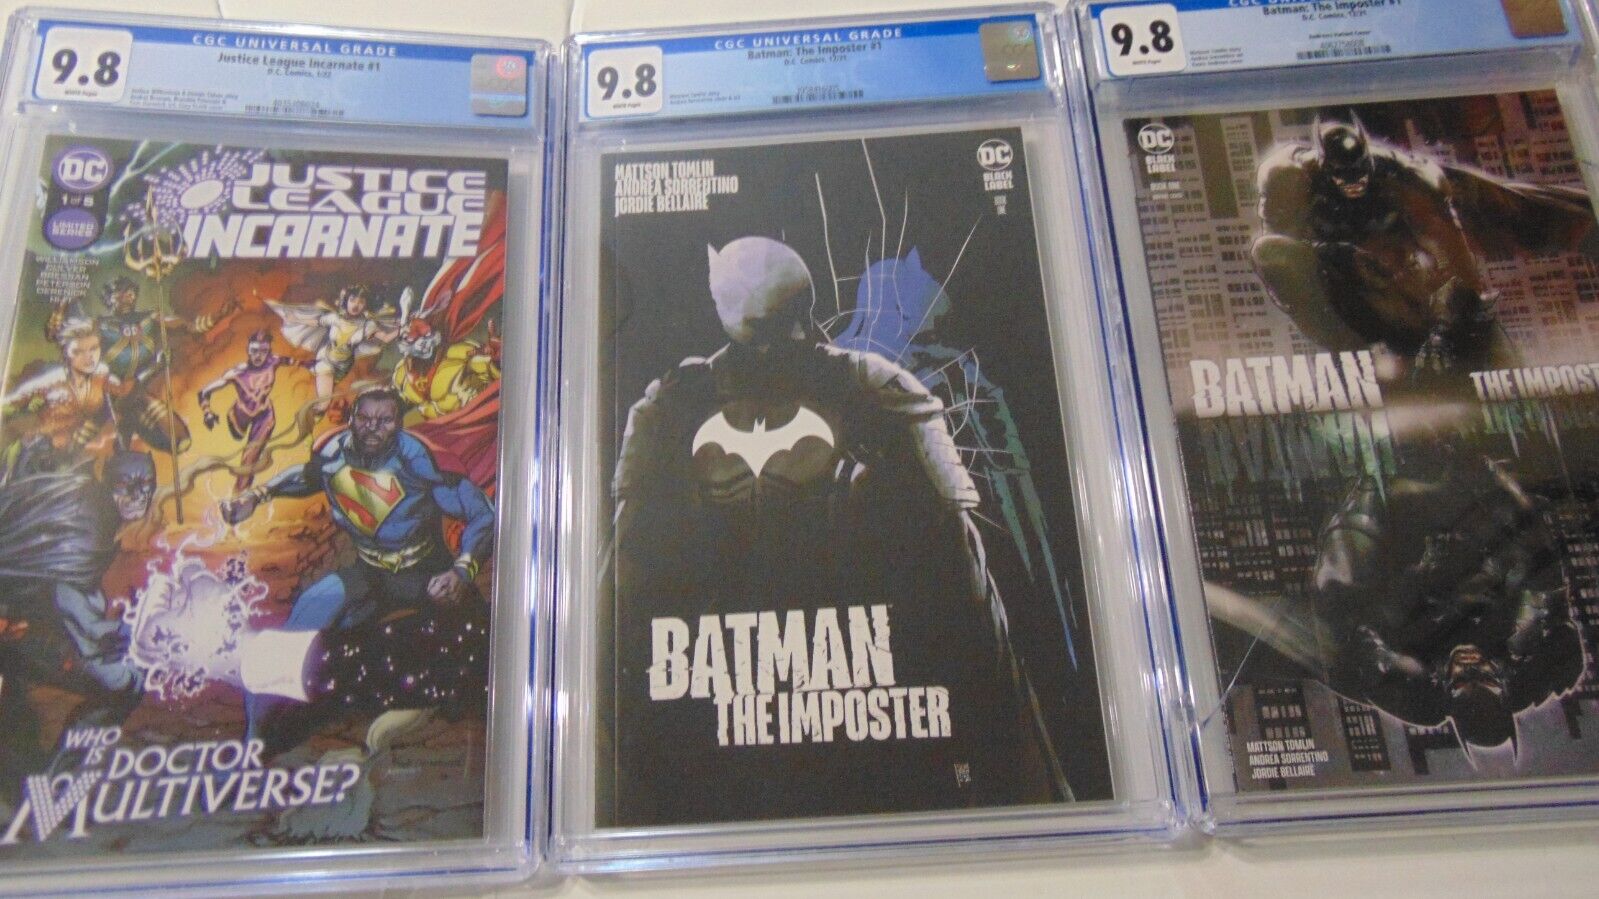 Batman the Imposter #1 CGC 9.8 LOT OF 3 READ + JUSTICE LEAGUE INCARNATE #1 9.8